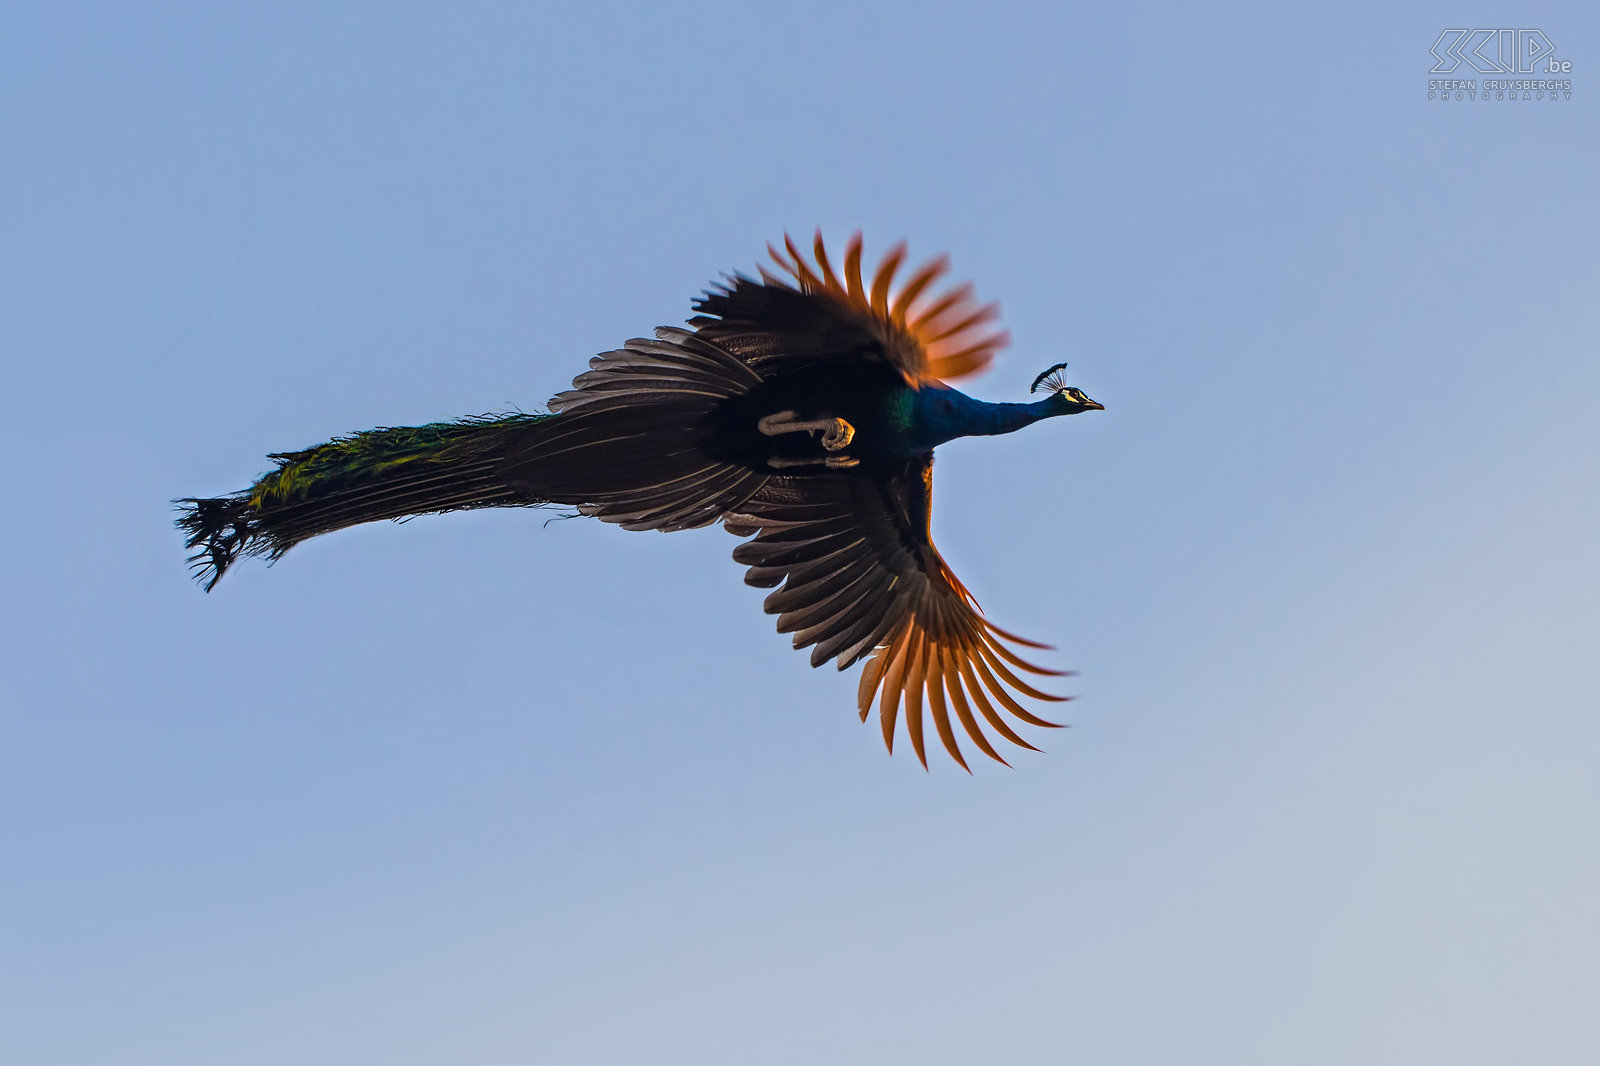 Keoladeo - Flying peacock In the early morning in Keoladeo national park I was able to shoot some photos of a flying peacock, something I had never witnessed before.<br />
<br />
The Indian peafowl is a resident breeder across the Indian subcontinent. The male peacock is predominantly blue with a fan-like crest of wire-like feathers and with a long train made up of elongated covert feathers which bear colourful eyespots. They only fly to escape danger or to jump onto branches to look for a roost for the night. In the morning they fly out of the trees back to the ground. Stefan Cruysberghs